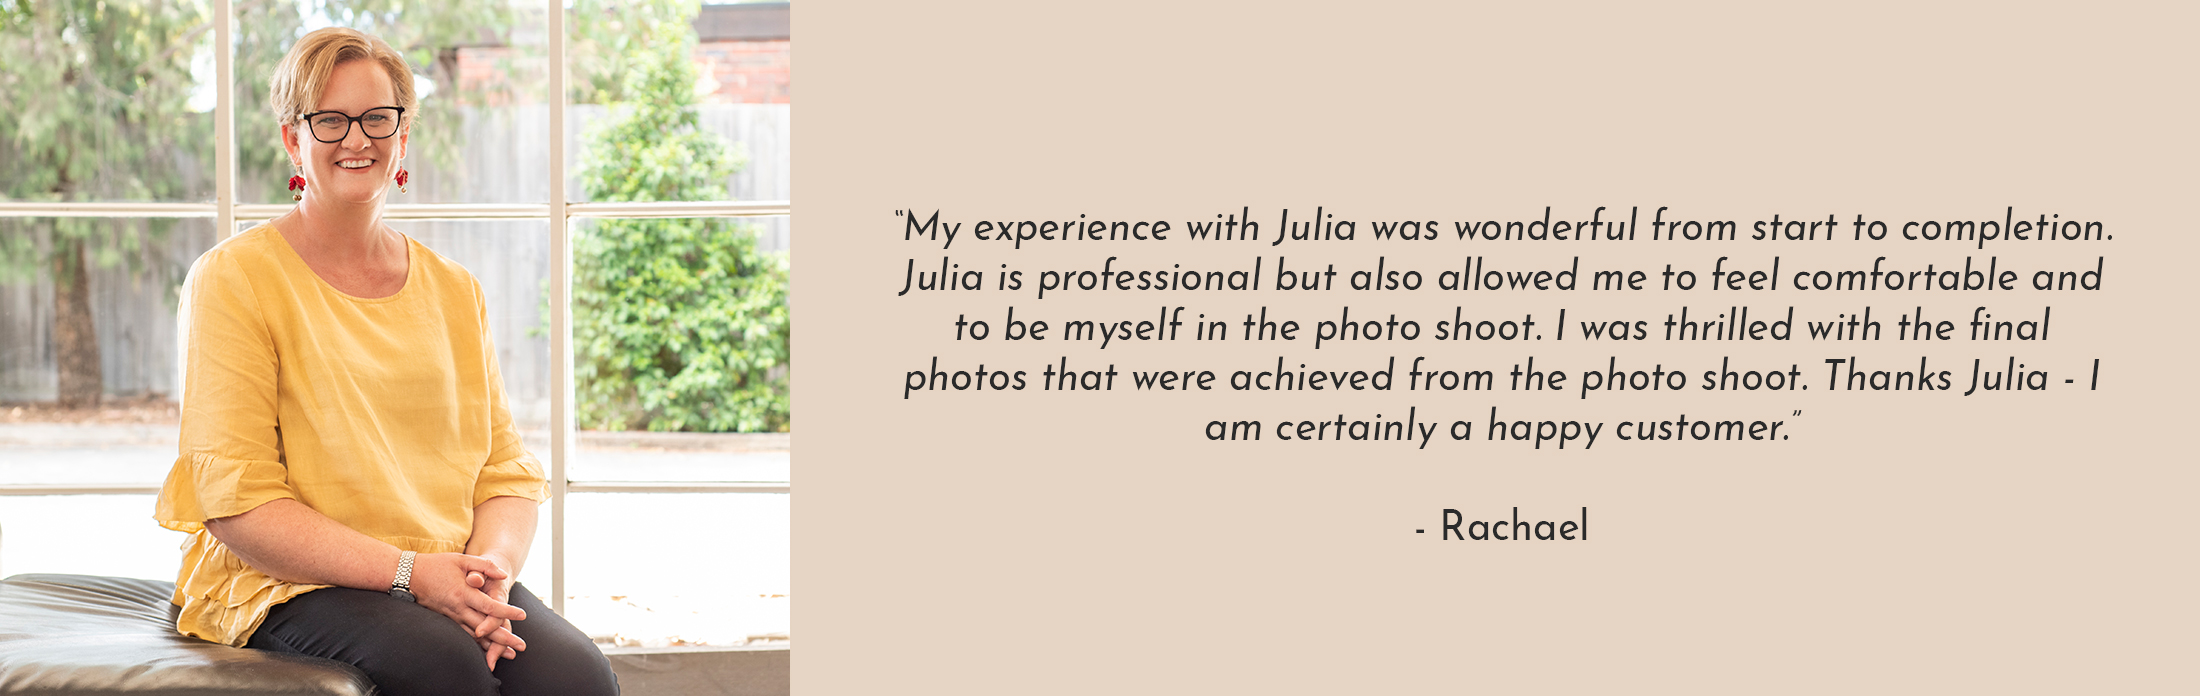 Text Reads: “My experience with Julia was wonderful from start to completion. Julia is professional but also allowed me to feel comfortable and to be myself in the photo shoot. I was thrilled with the final photos that were achieved from the photo shoot. Thanks Julia - I am certainly a happy customer.” - Rachael